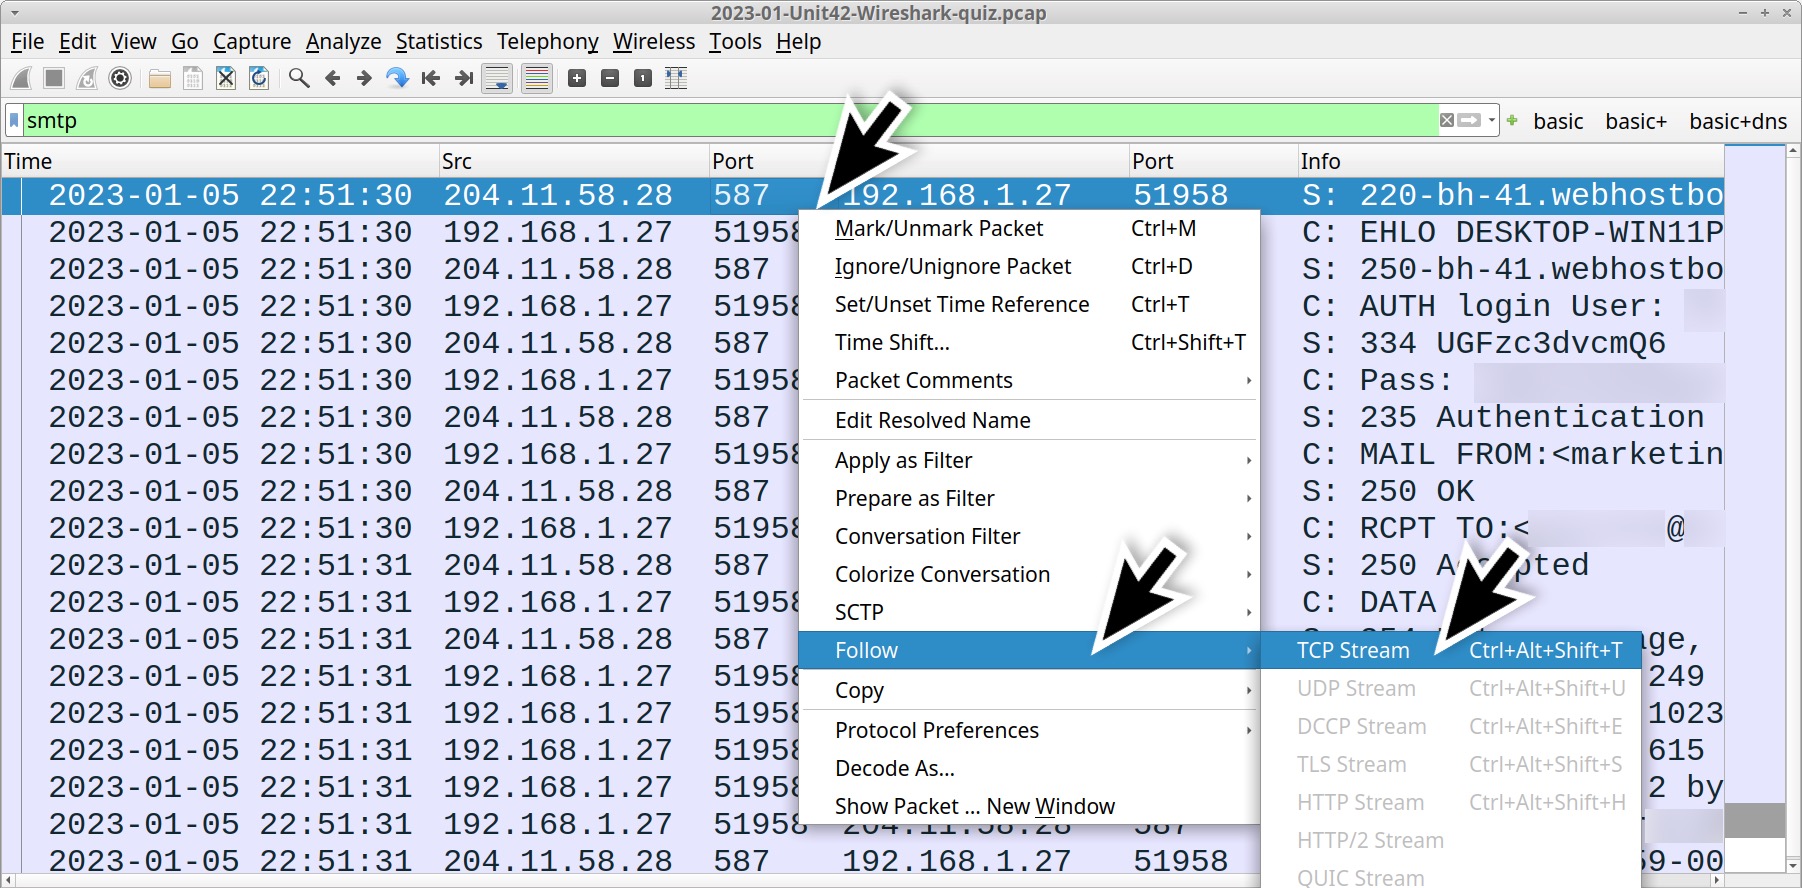 Image 5 is a screenshot of the Wireshark program. Arrows highlight menu windows that show how to follow a single TCP stream.